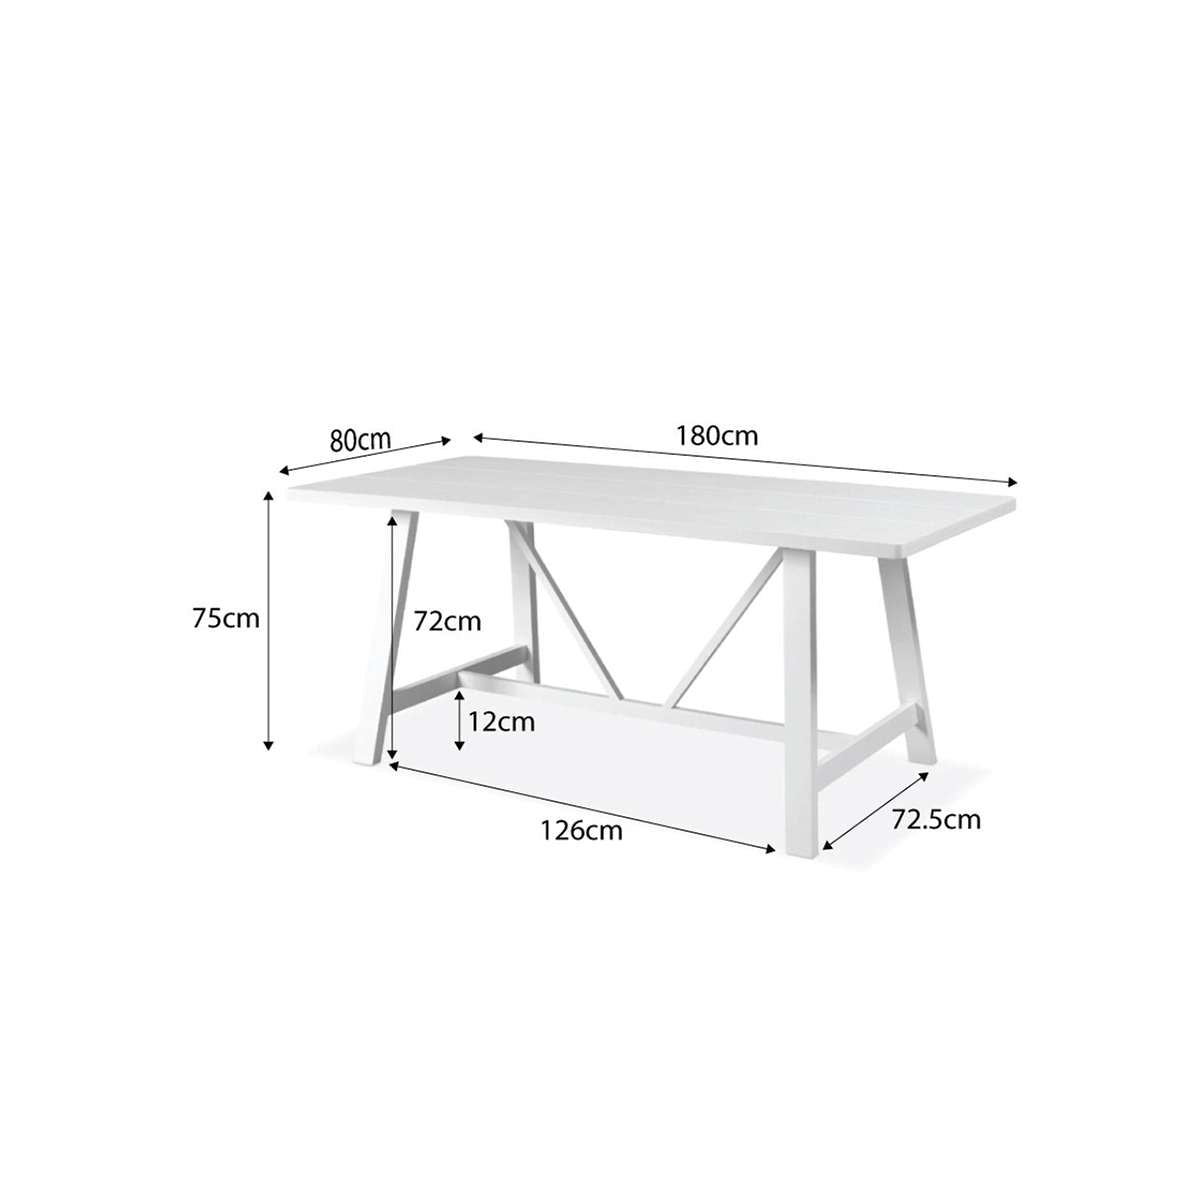 Hamptons 6 Seater Dining Table - White